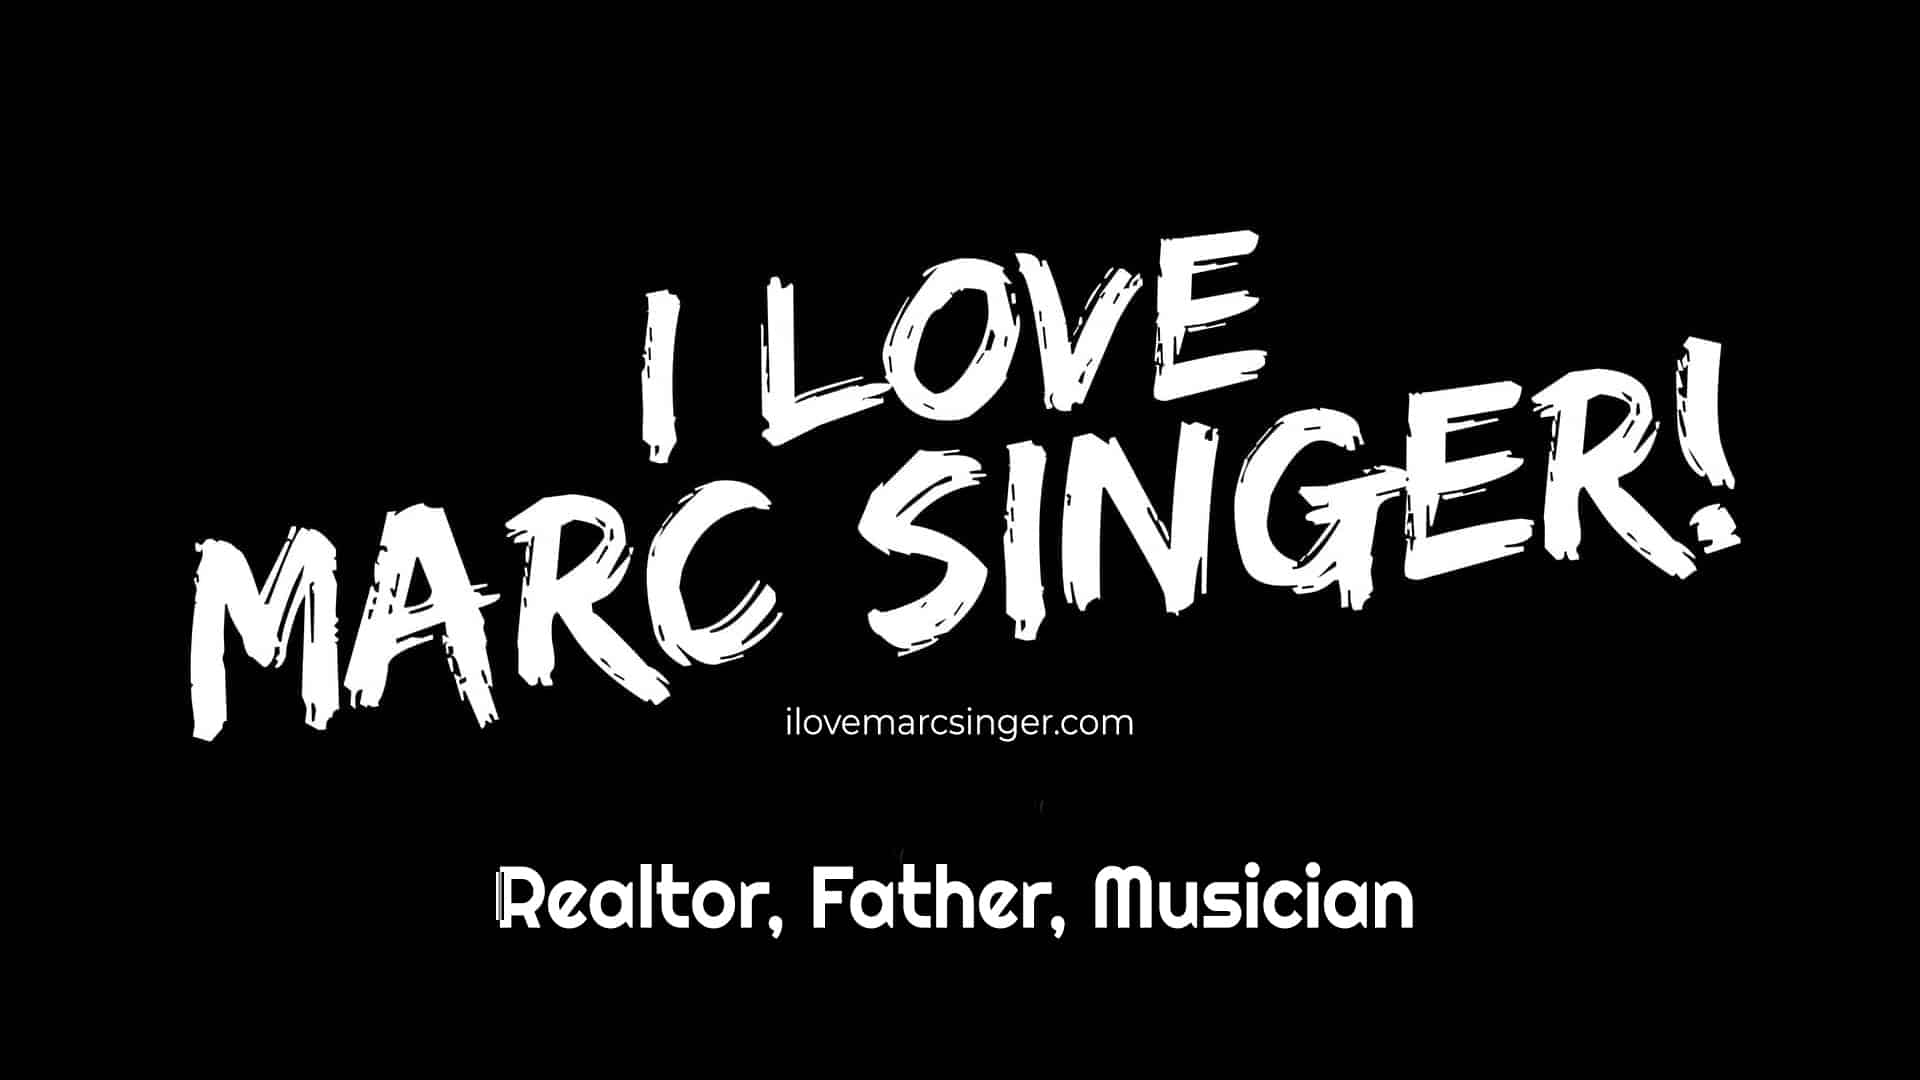 marc-singer-logo-graphic-new-tag-2 copy